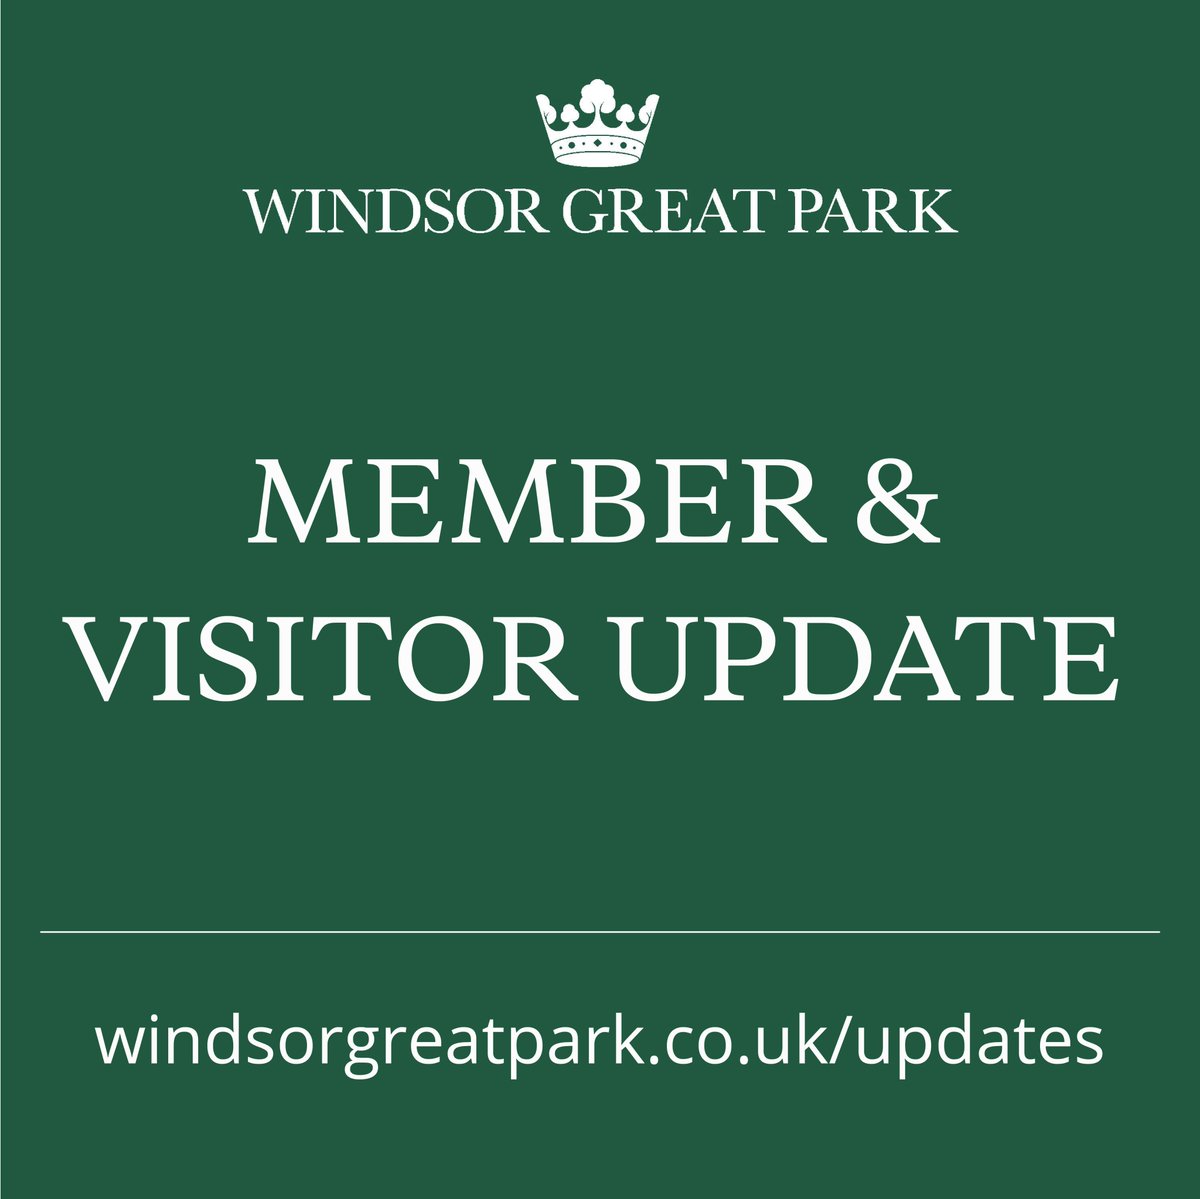 Please be aware of upcoming Deer Park closures beginning on Monday 2 October. As we enter the deer rutting season, please also be reminded of the following guidance when visiting the Deer Park: windsorgreatpark.co.uk/updates @visitwindsor @MyRoyalBorough